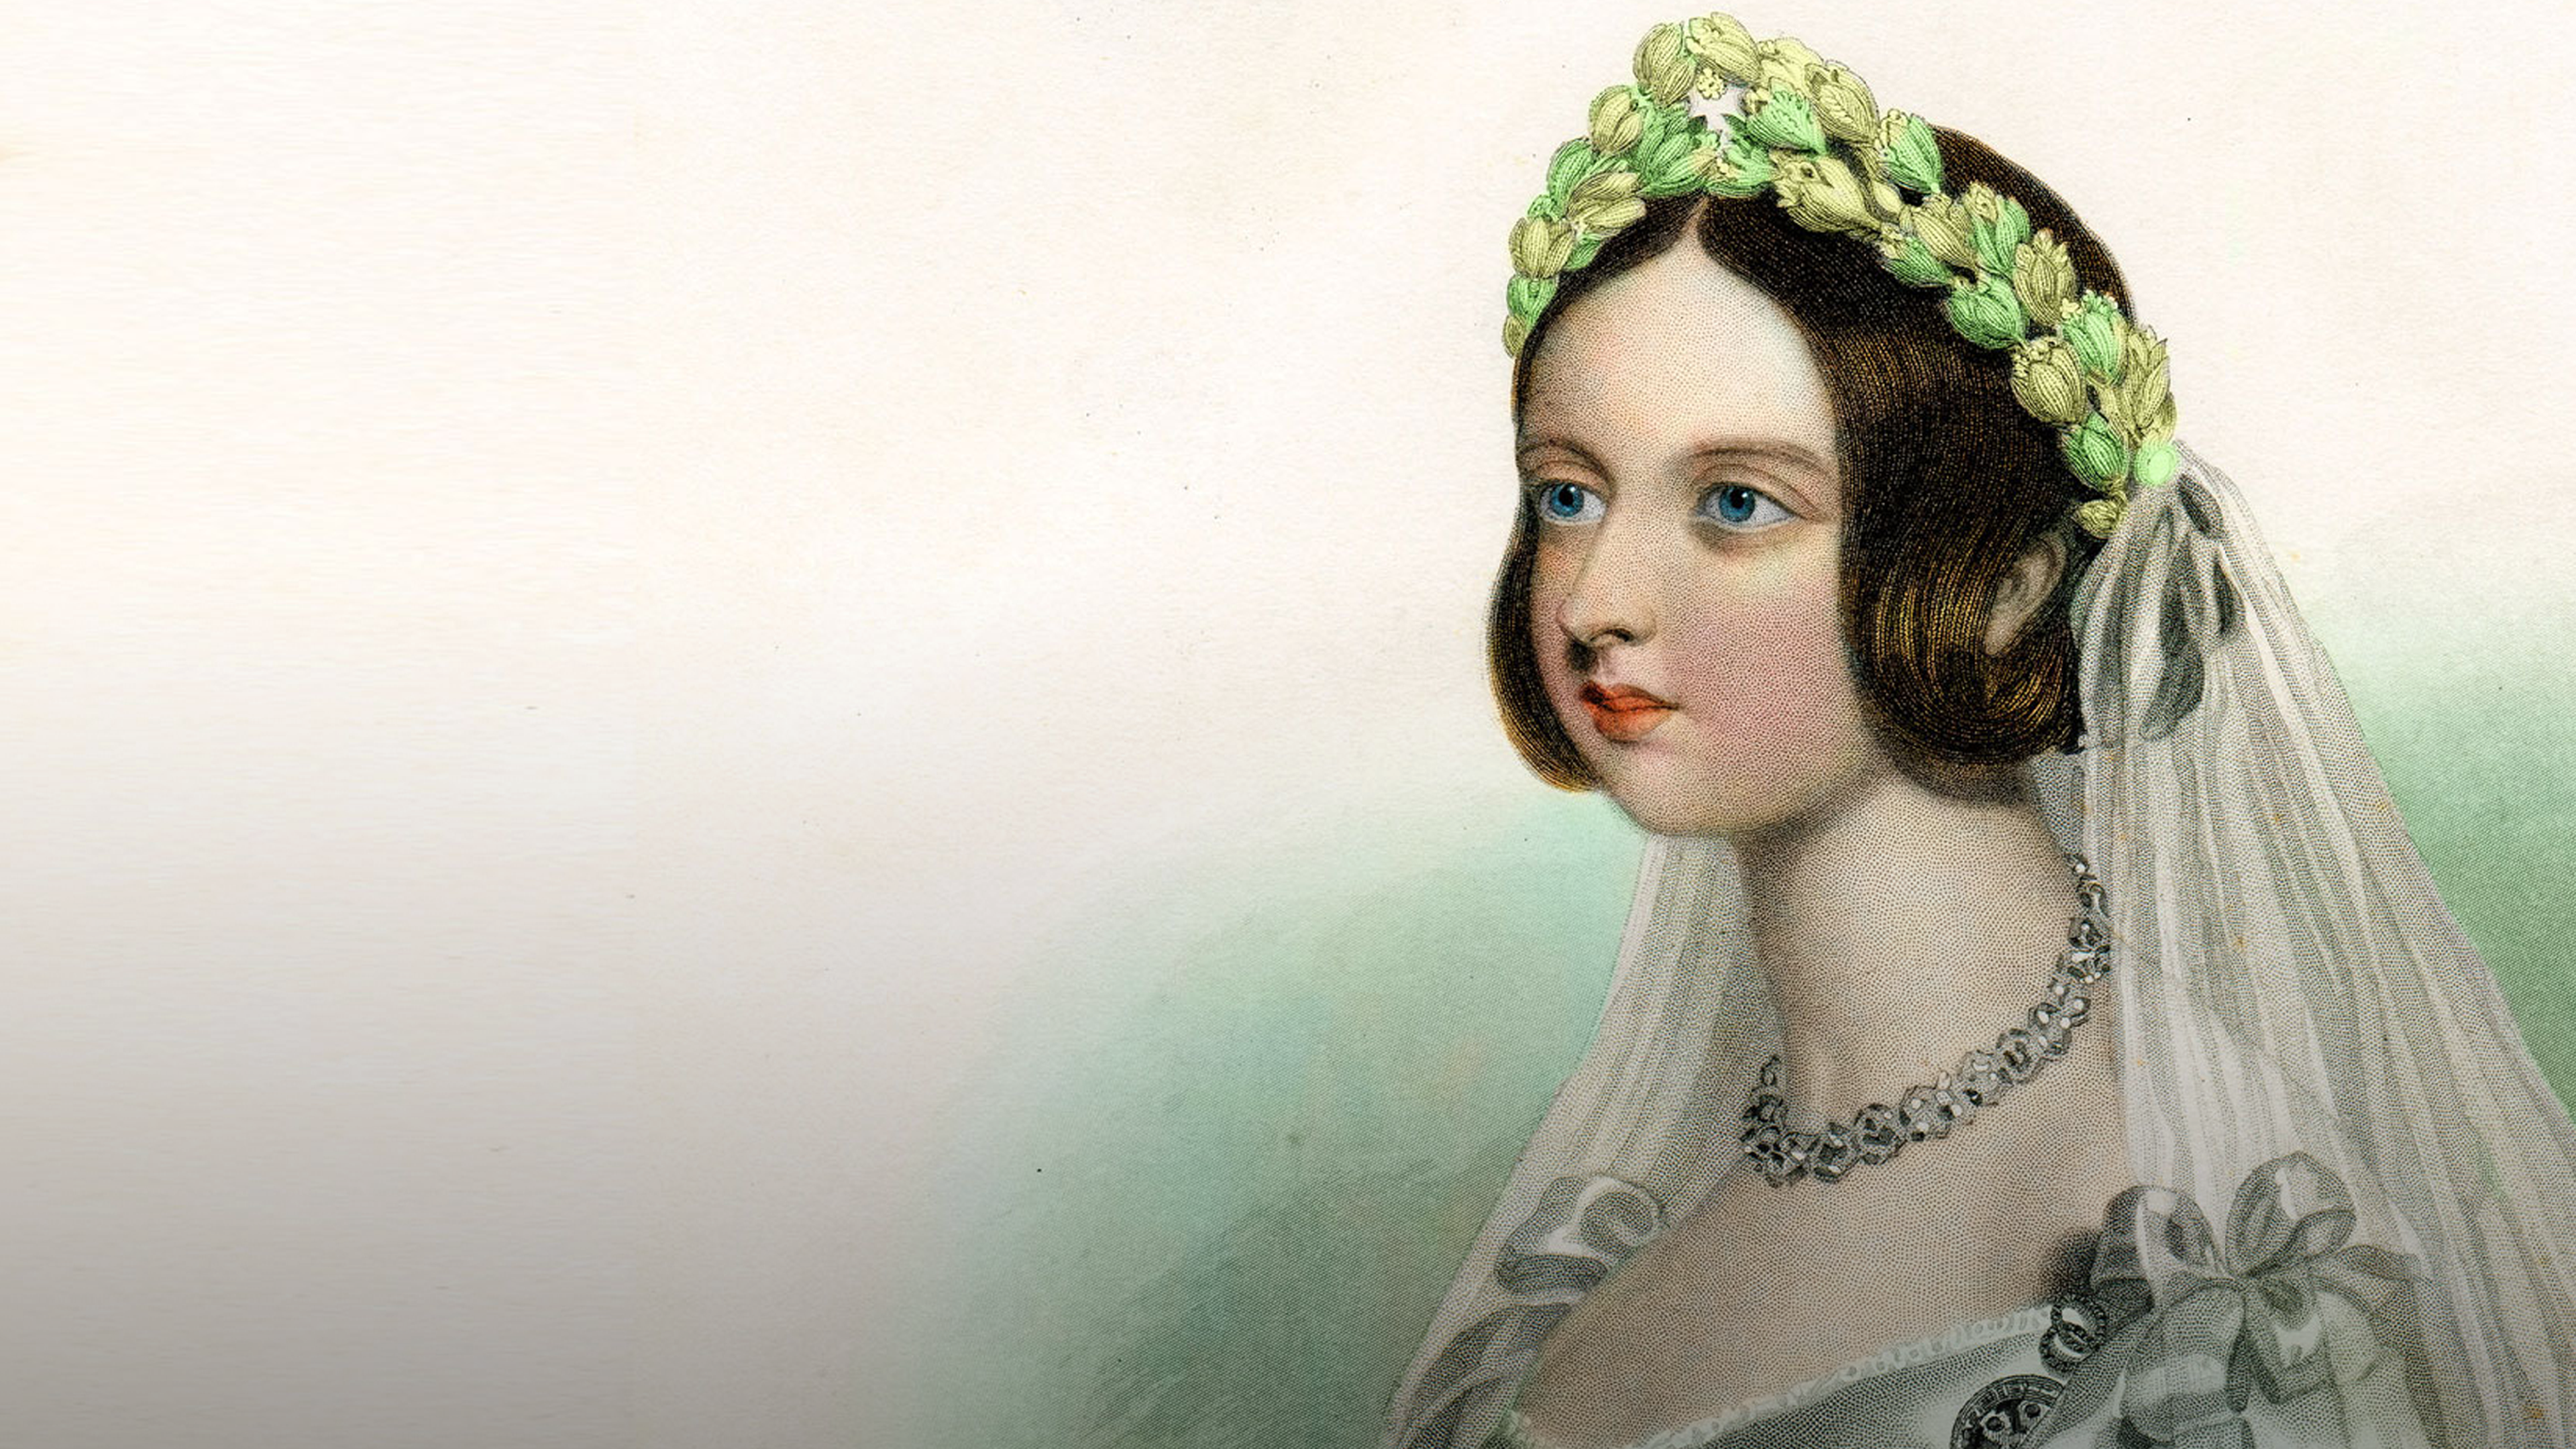 Illustration of a young Queen Victoria with short brown hair wearing a crown of green flowers and a diamond necklace.